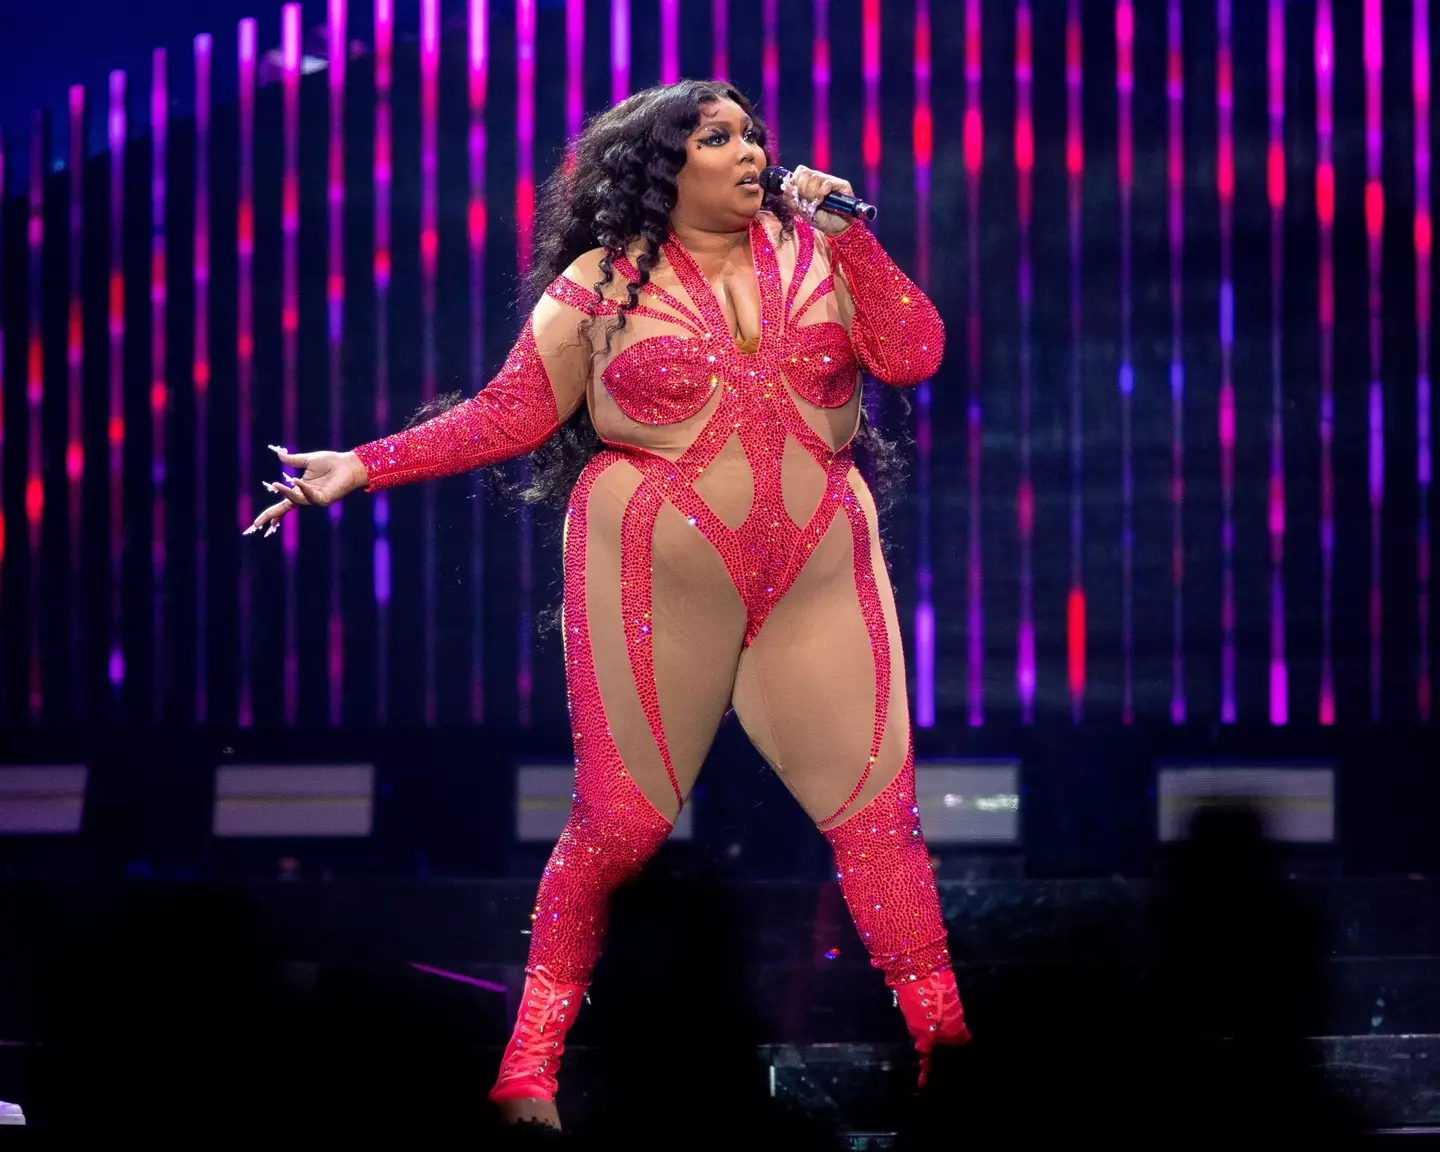 Lizzo calls out the 'delusional' and conflicting things fans say about her  body